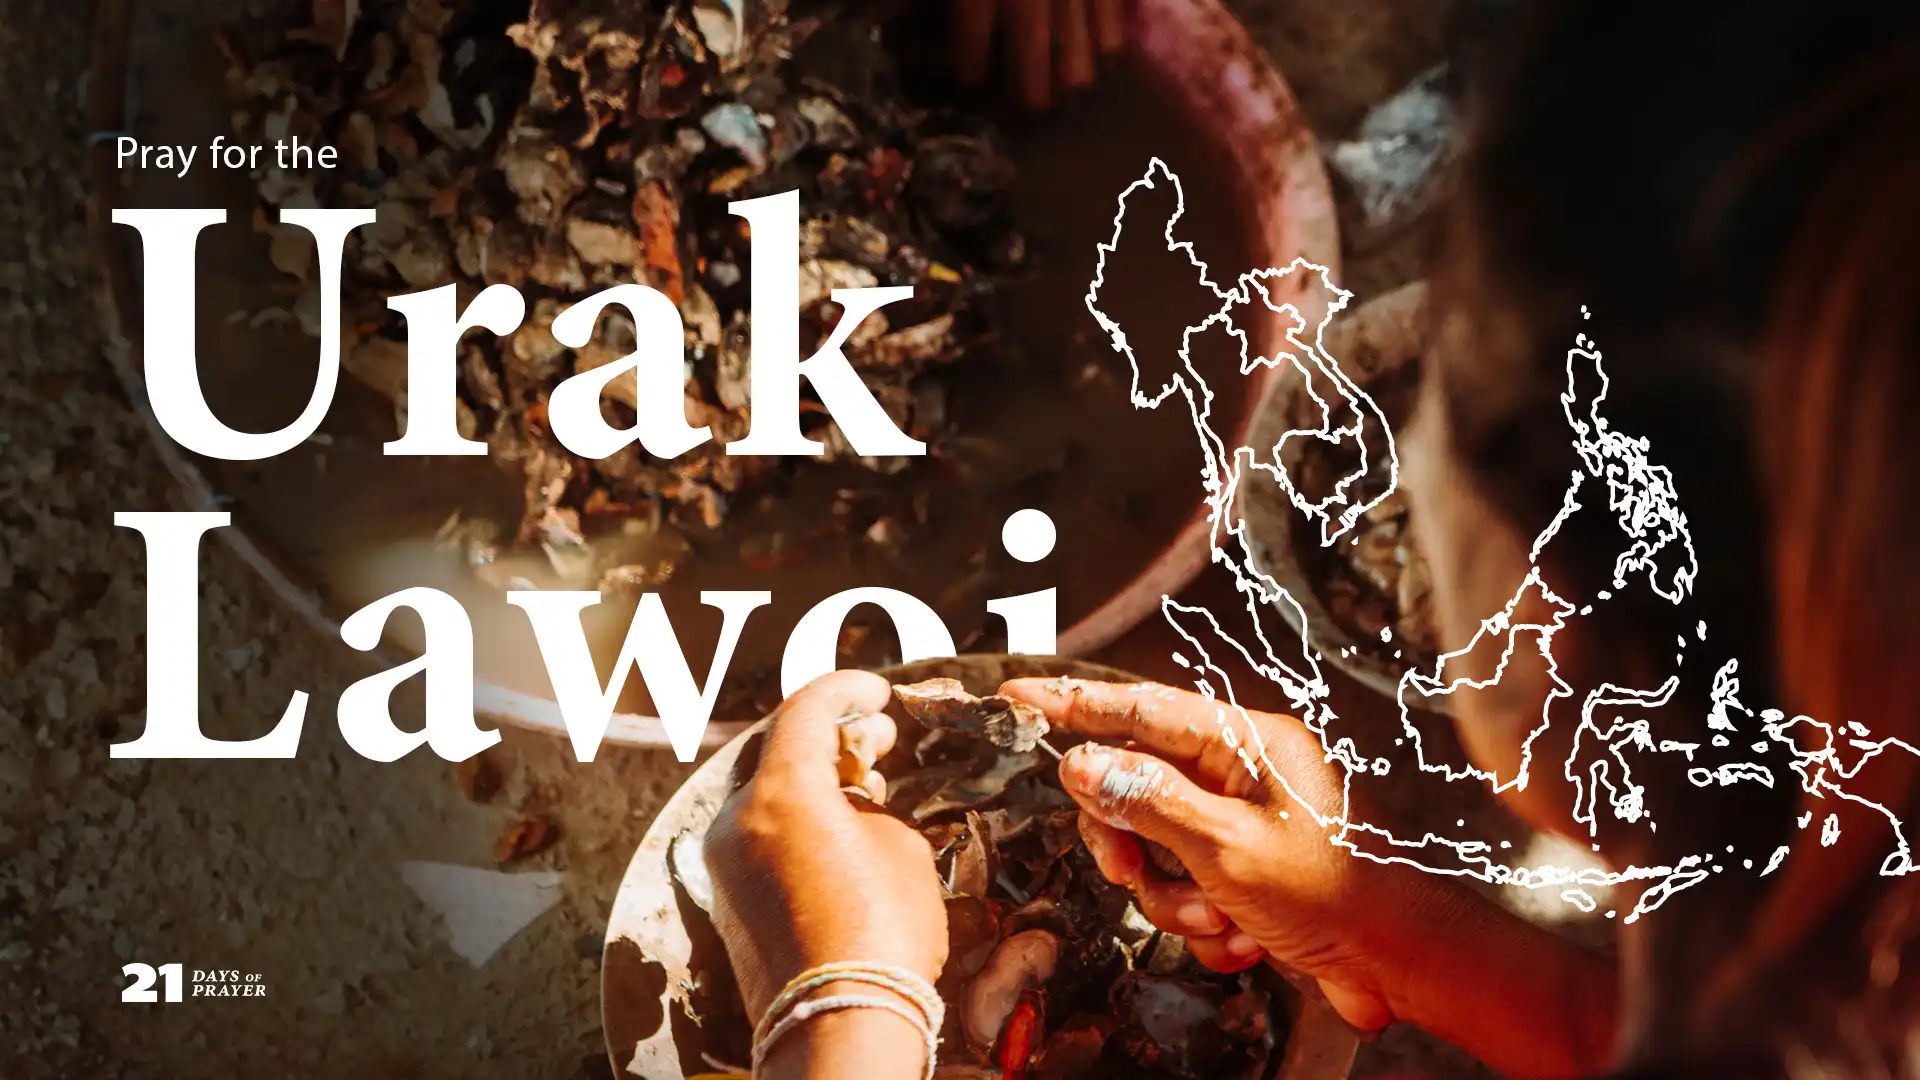 Featured image for “21 Days of Prayer | Day 8: Urak Lawoi”